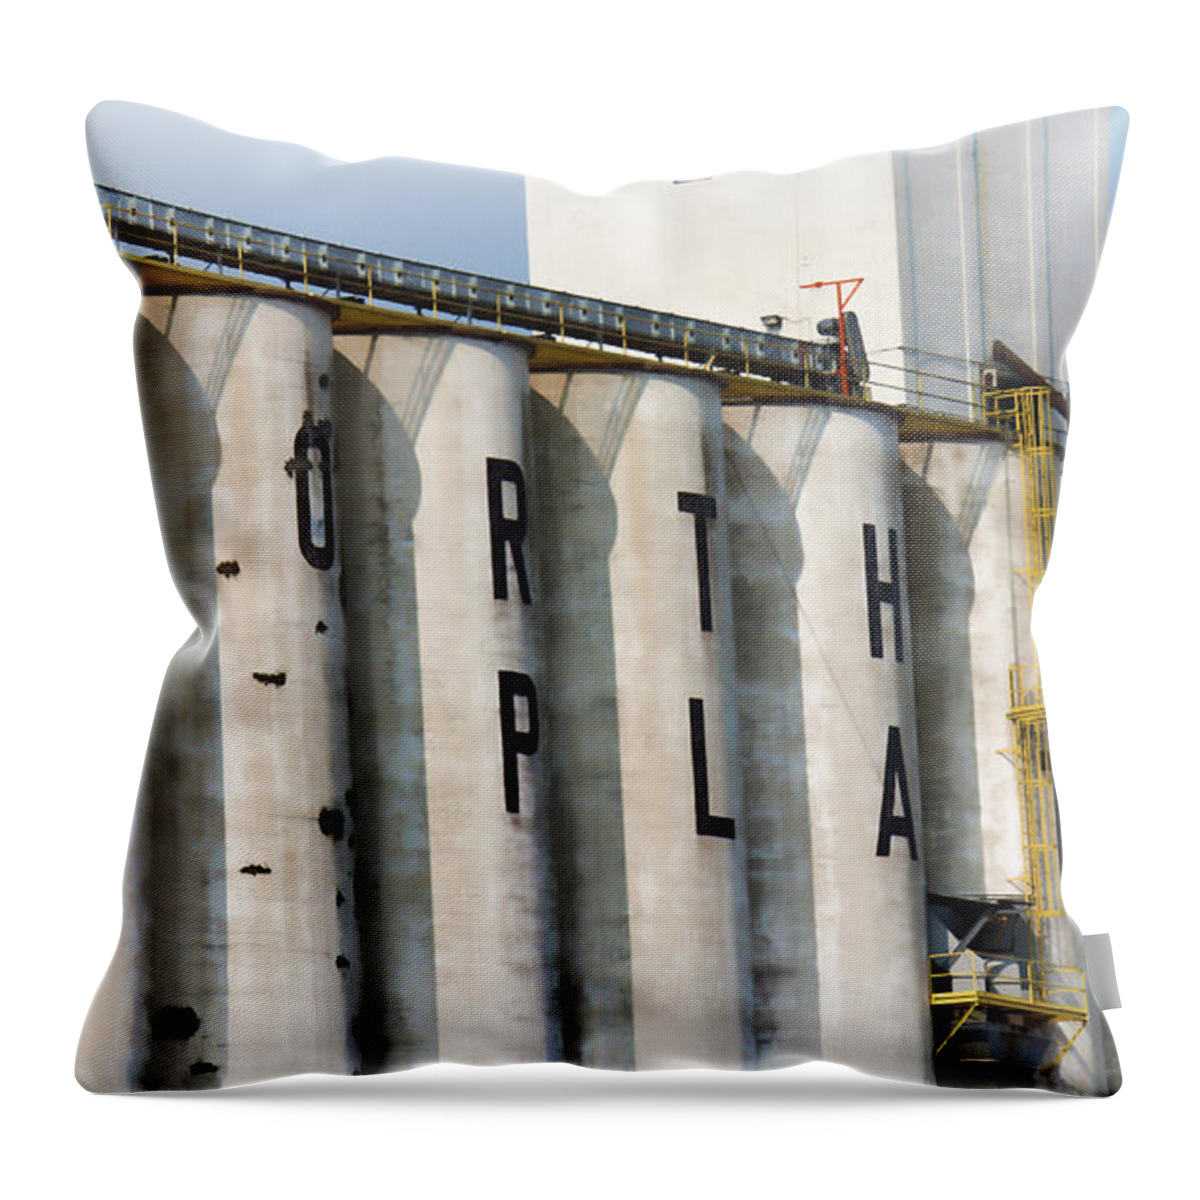 Grain Elevator Throw Pillow featuring the photograph Elevator by Sylvia Thornton